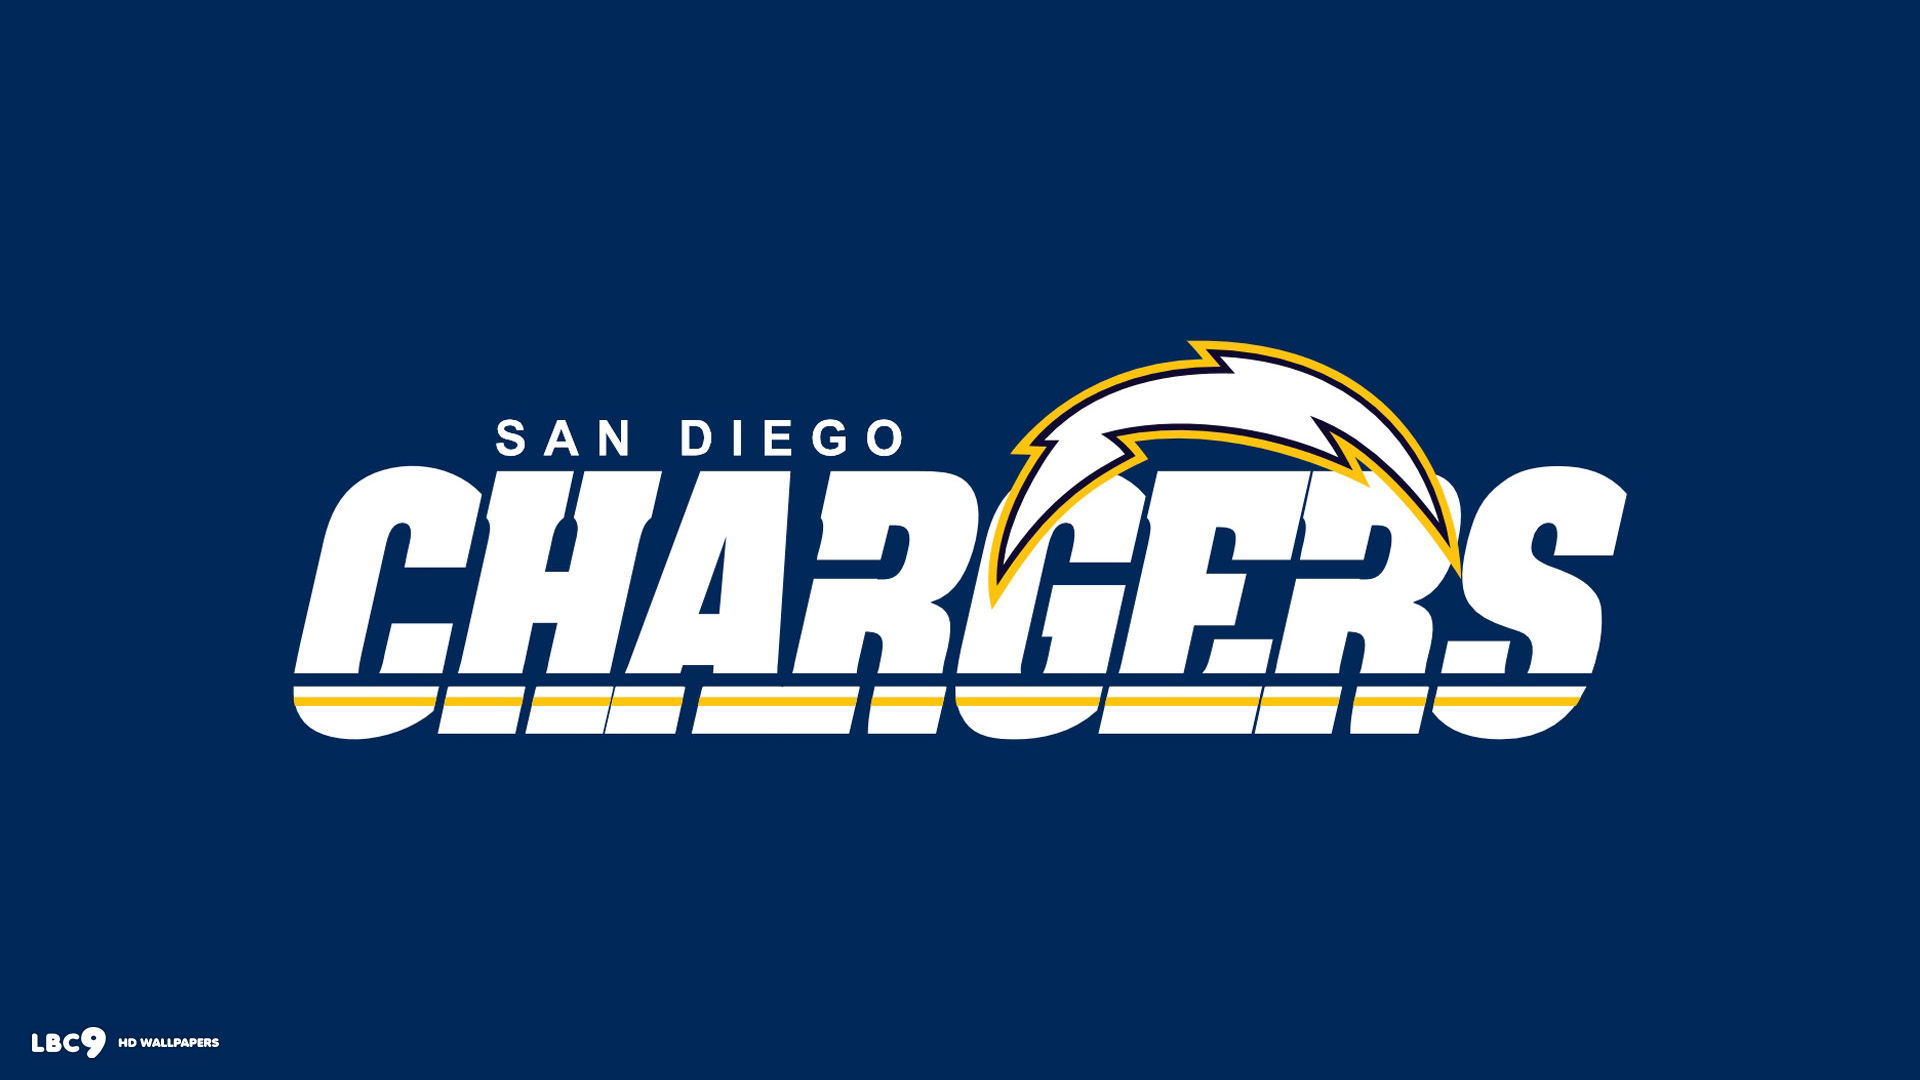 San Diego Chargers Wallpaper HD Early